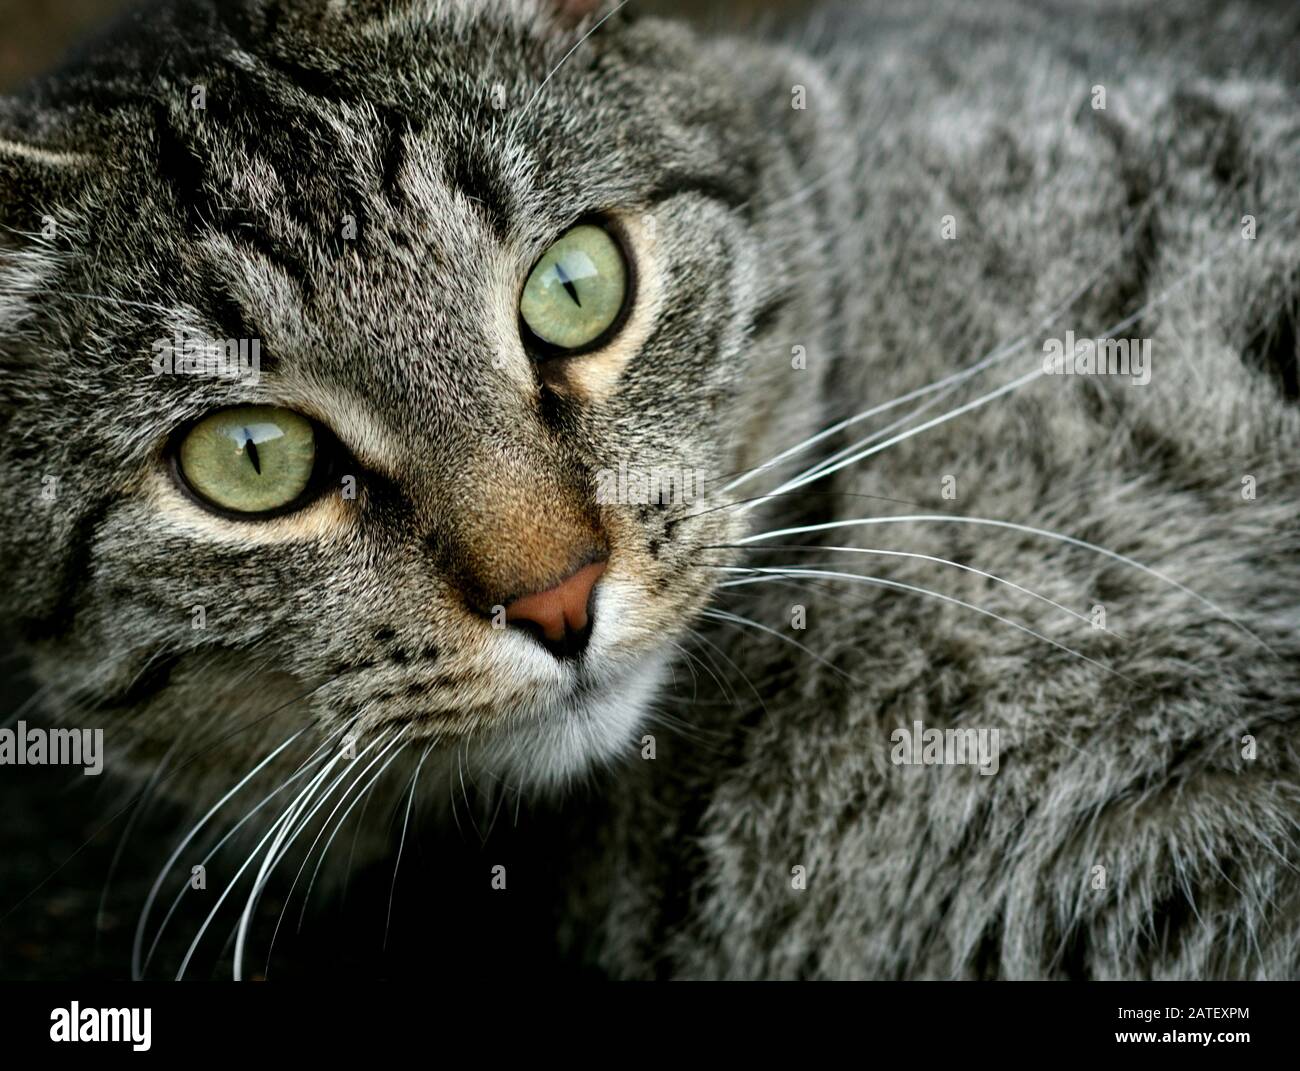 Full frame close-up of a cat focus on green eyes Stock Photo